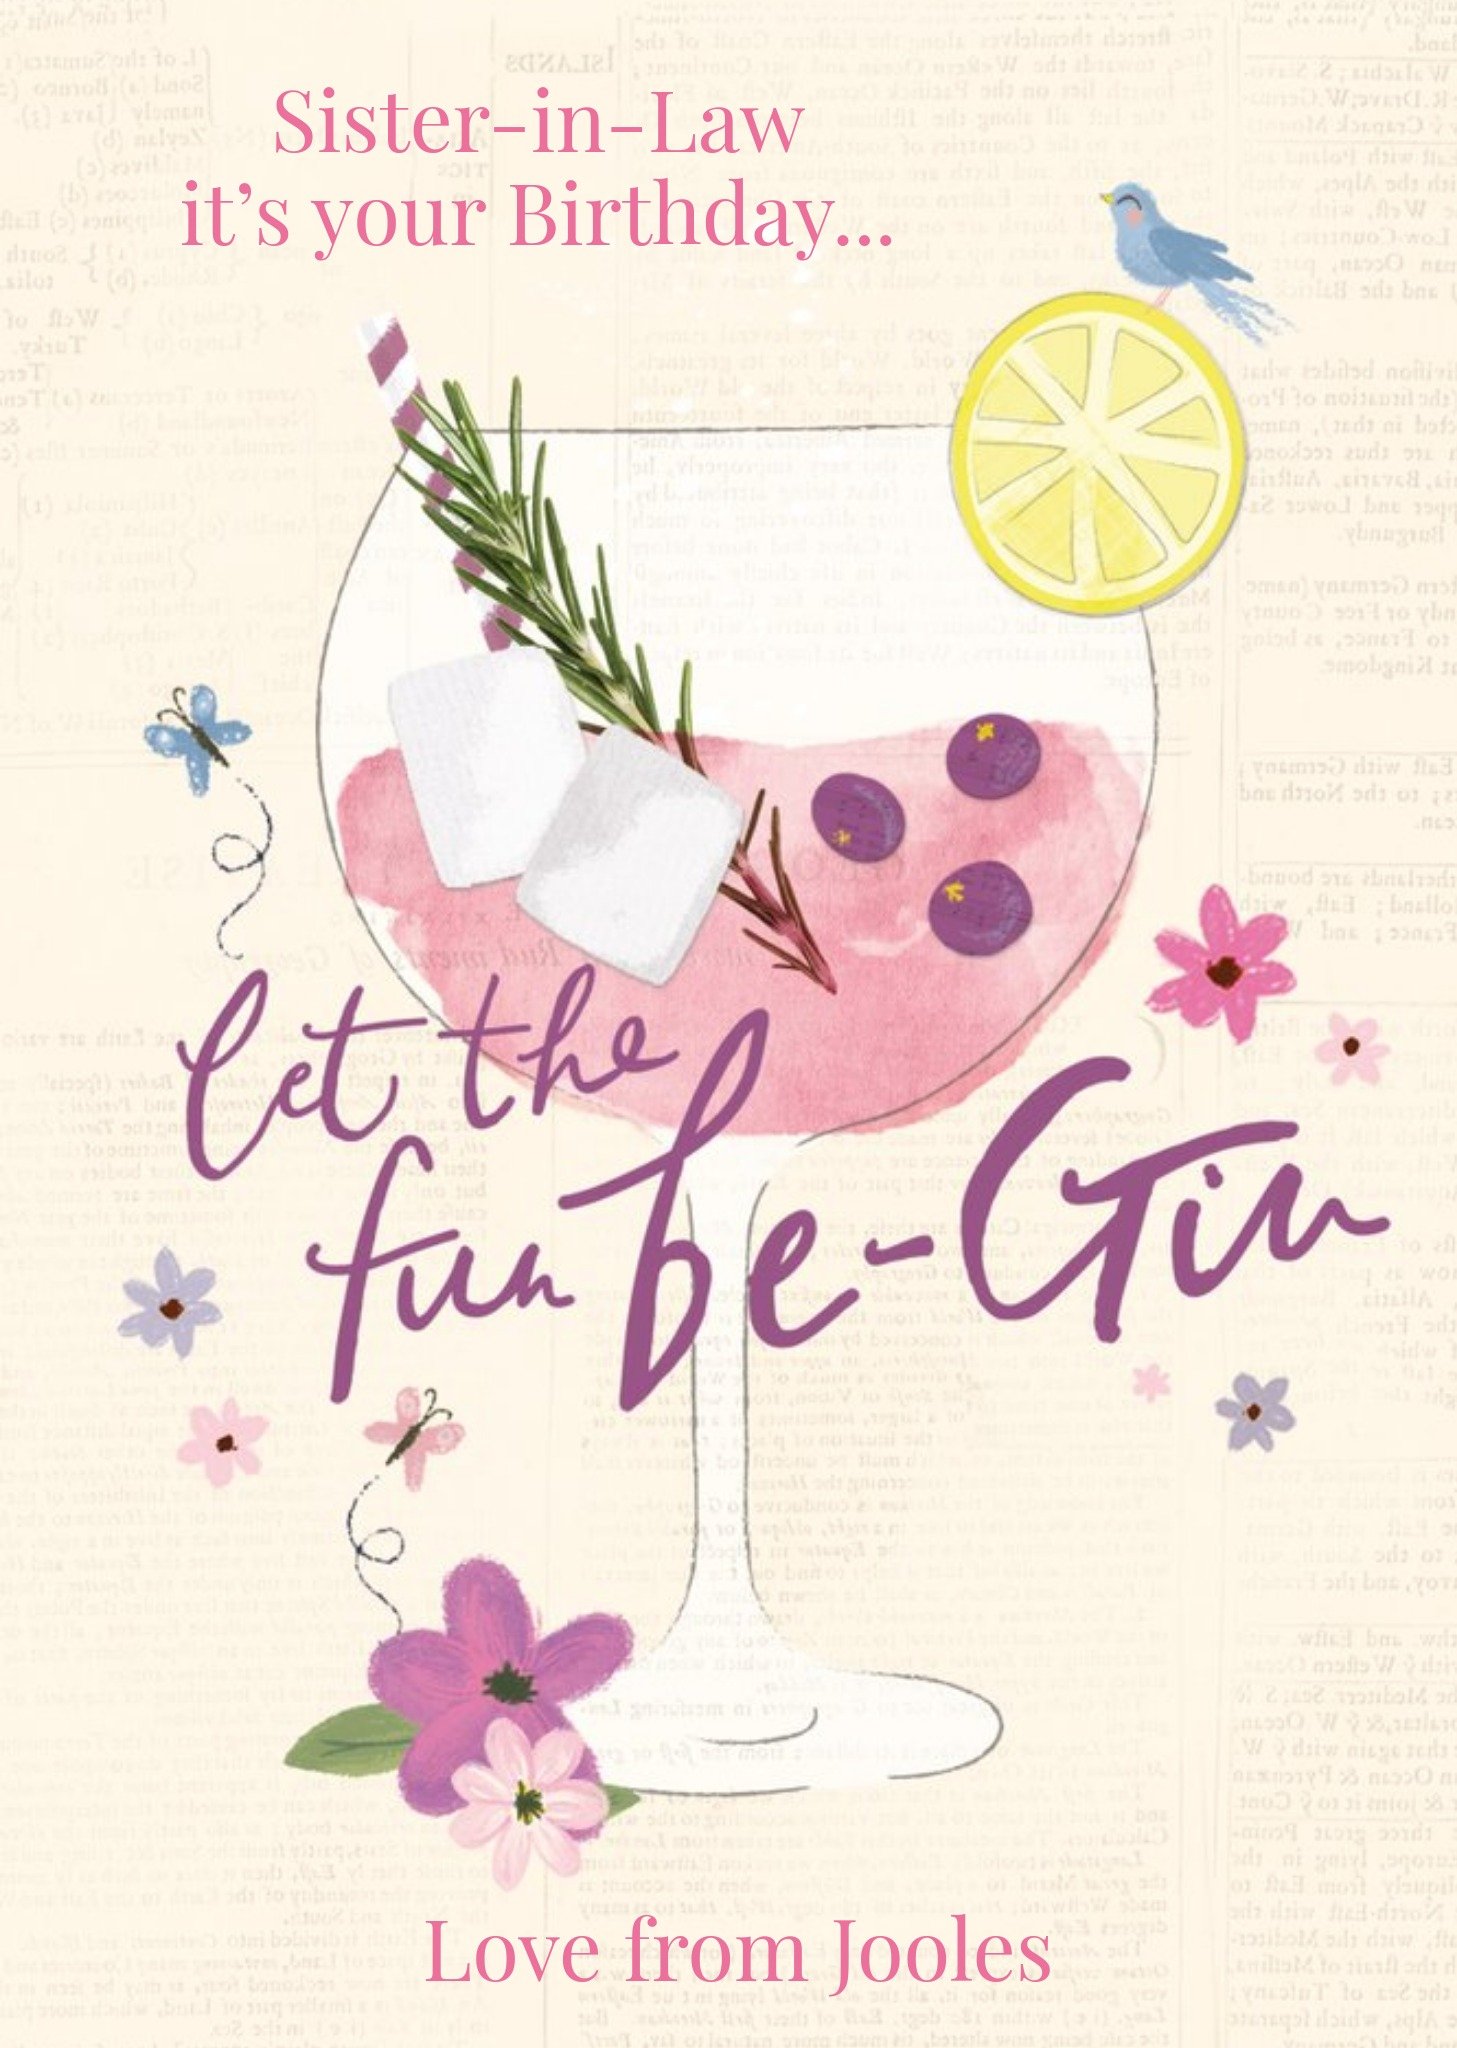 Moonpig Illustration Of A Glass Of Blueberry Rosemary Gin Sister-In-Law Birthday Card, Large